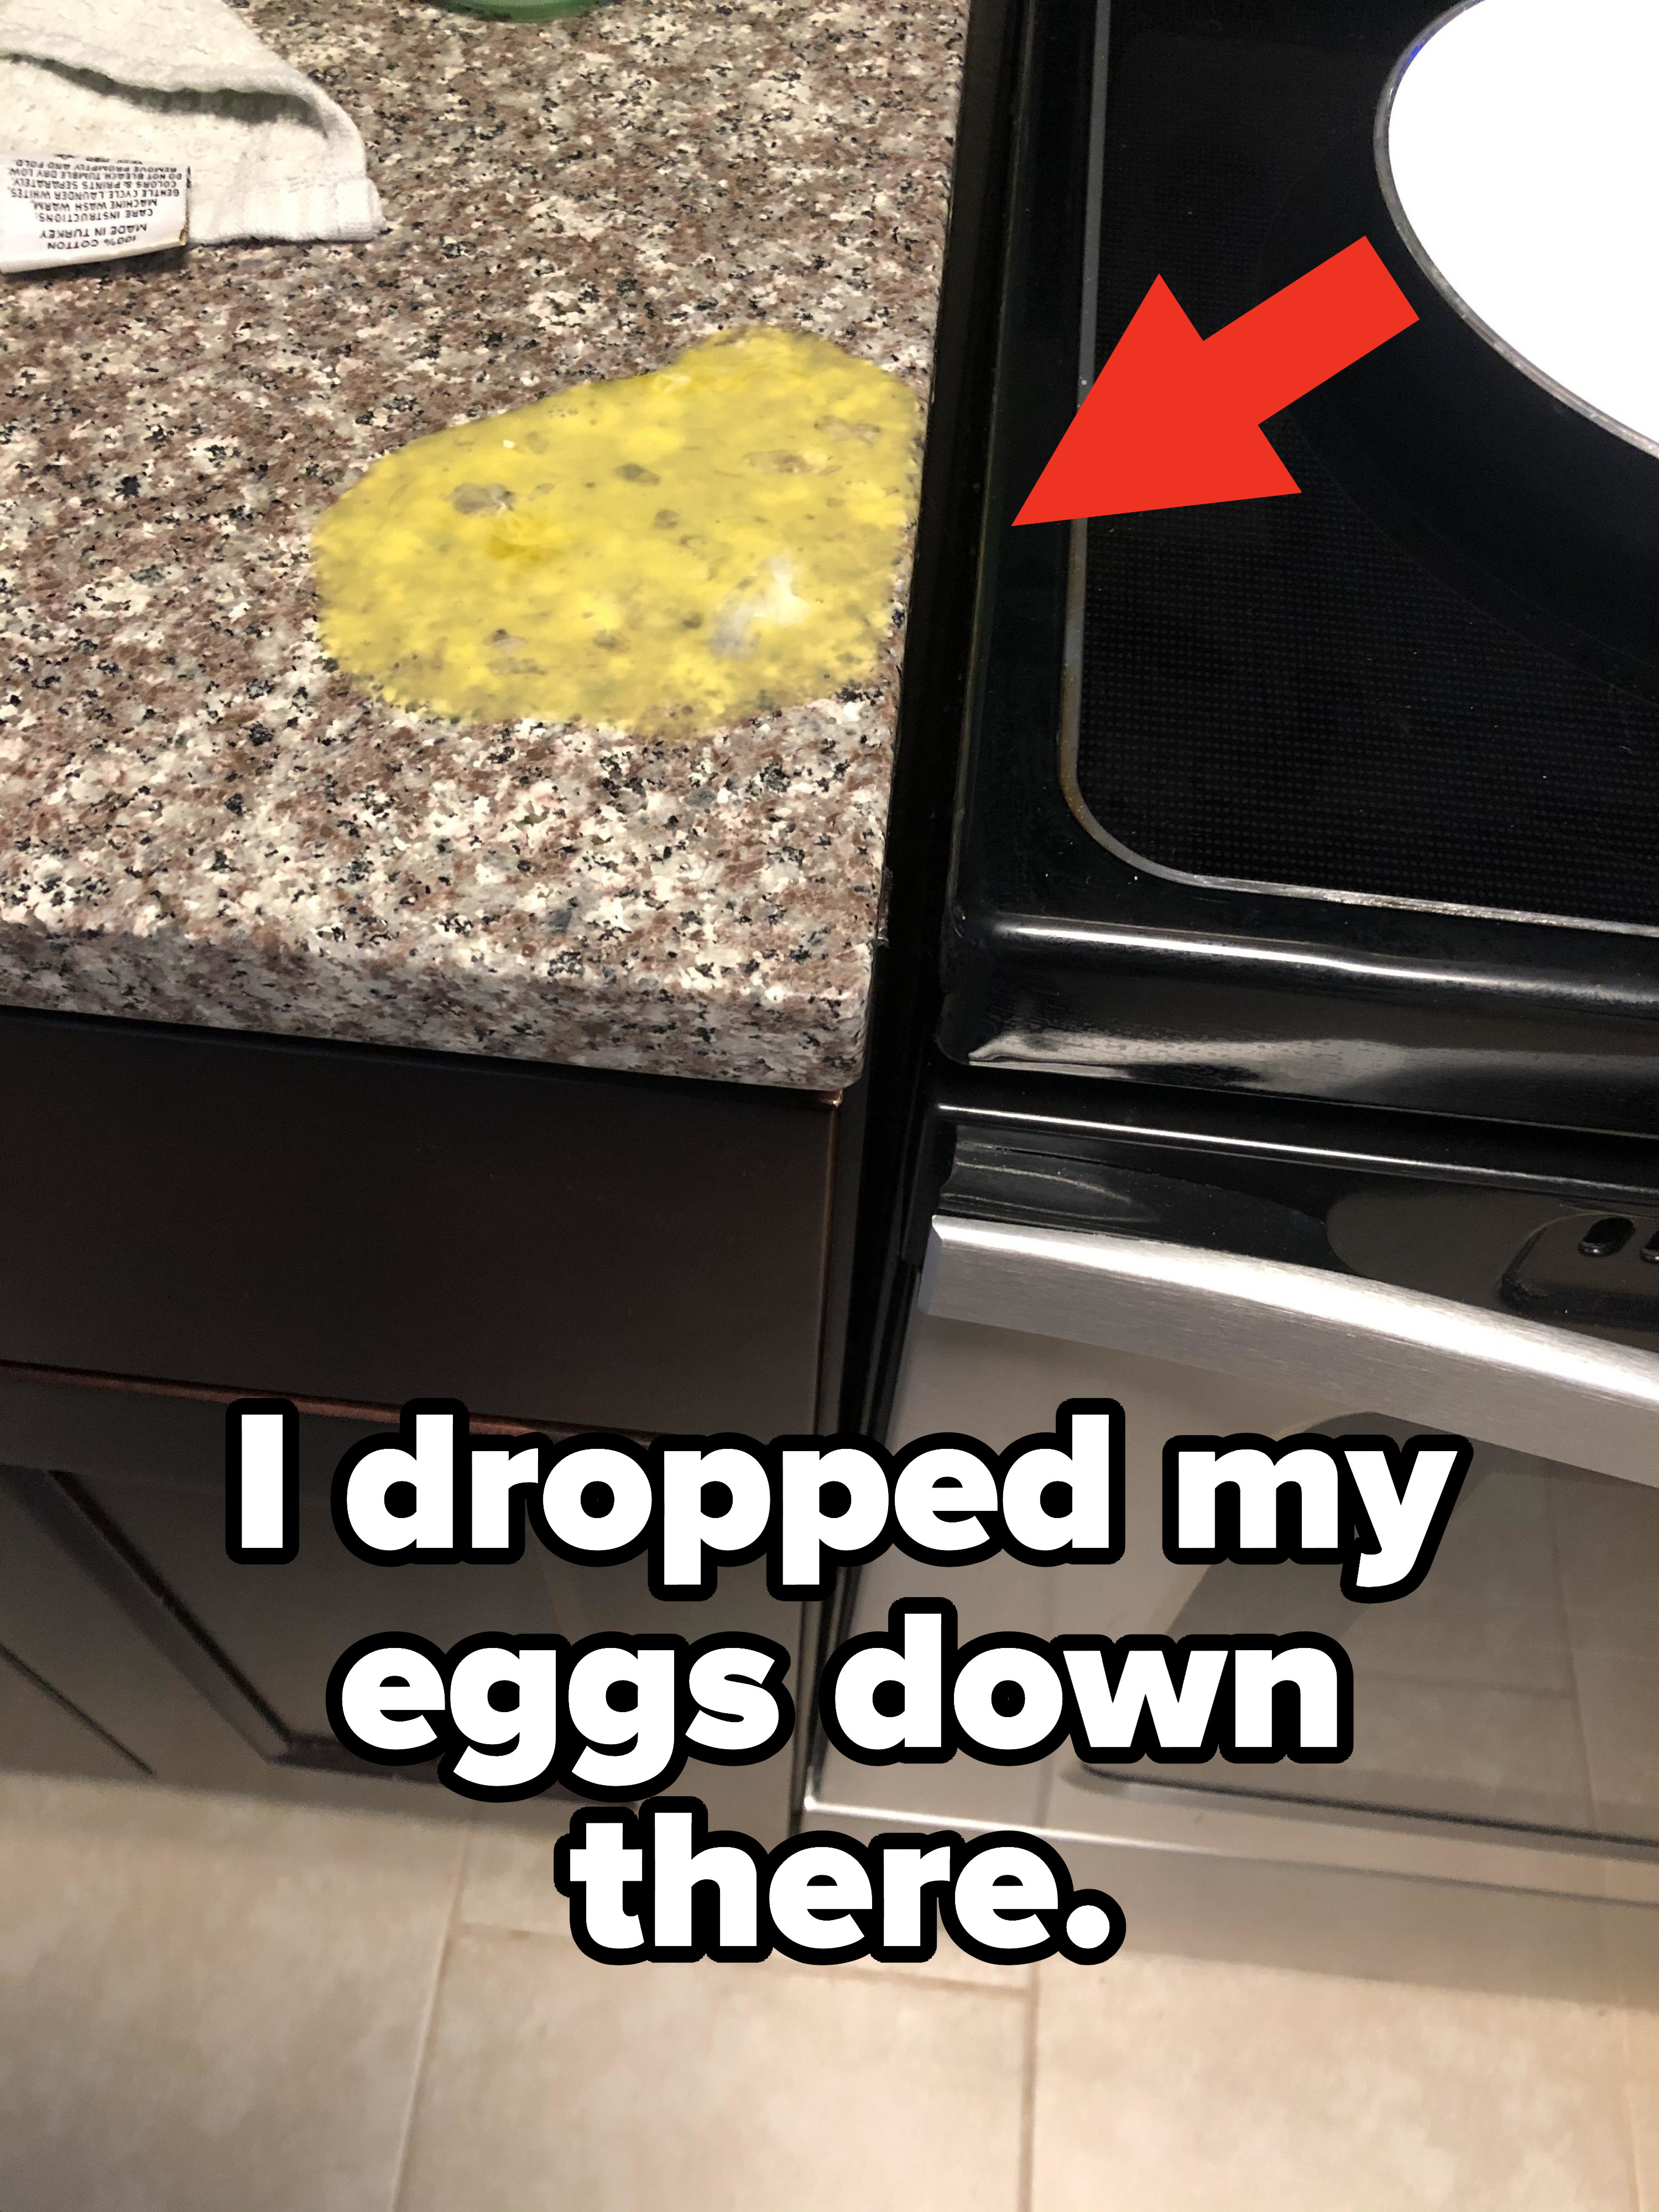 eggs that fell between and oven and a counter